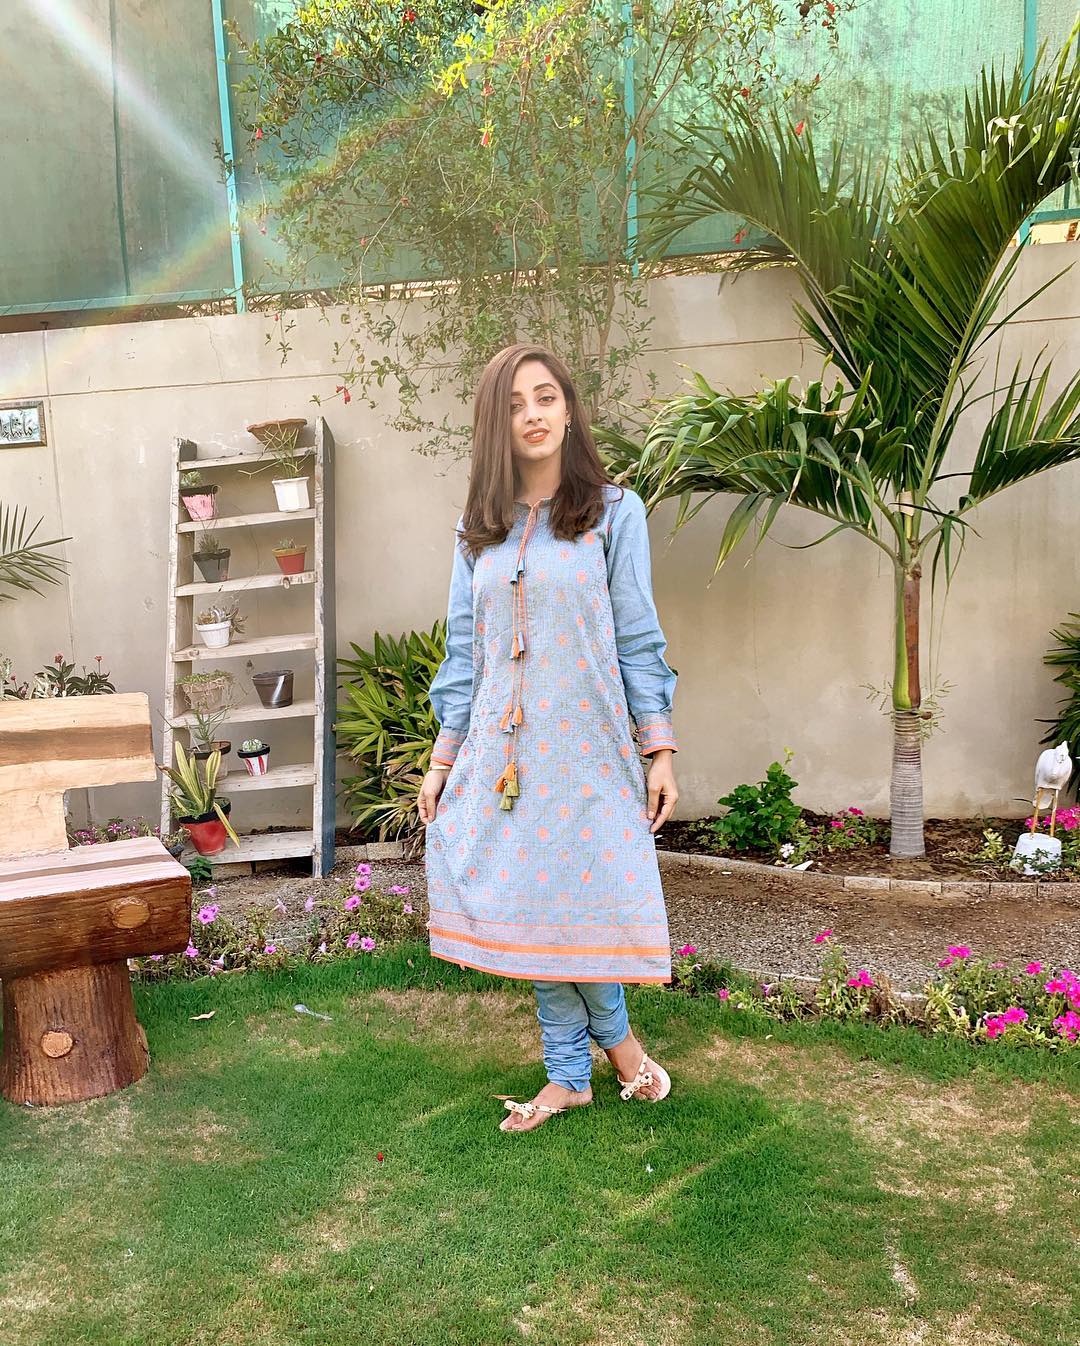 Beautiful Actress Sanam Chaudhry on the Set of her Drama Meer Abru